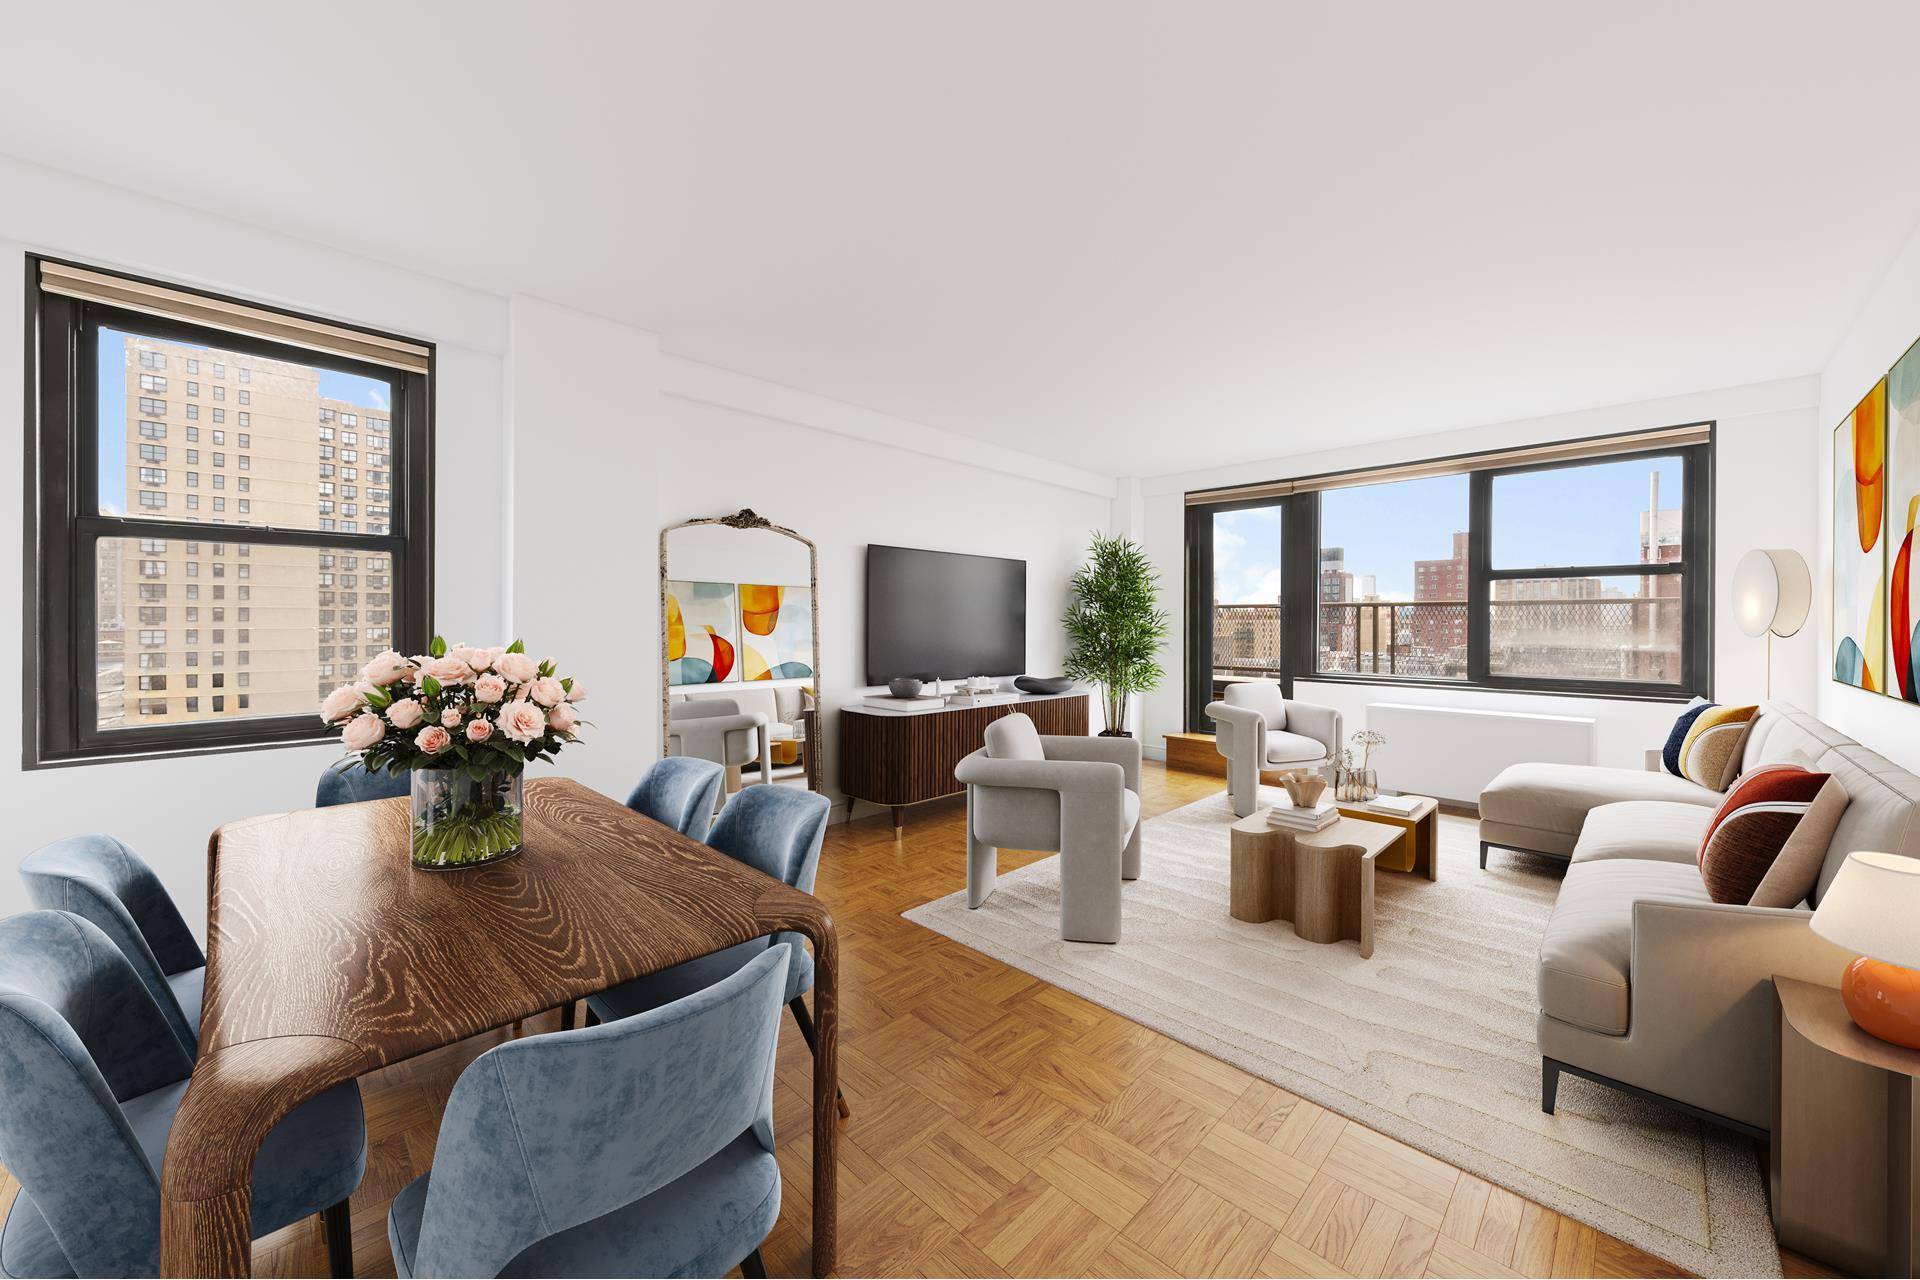 Step into luxury living with Apartment 16F at 200 East 27th Street, where southern sunlight floods every corner and breathtaking views await on your private terrace.